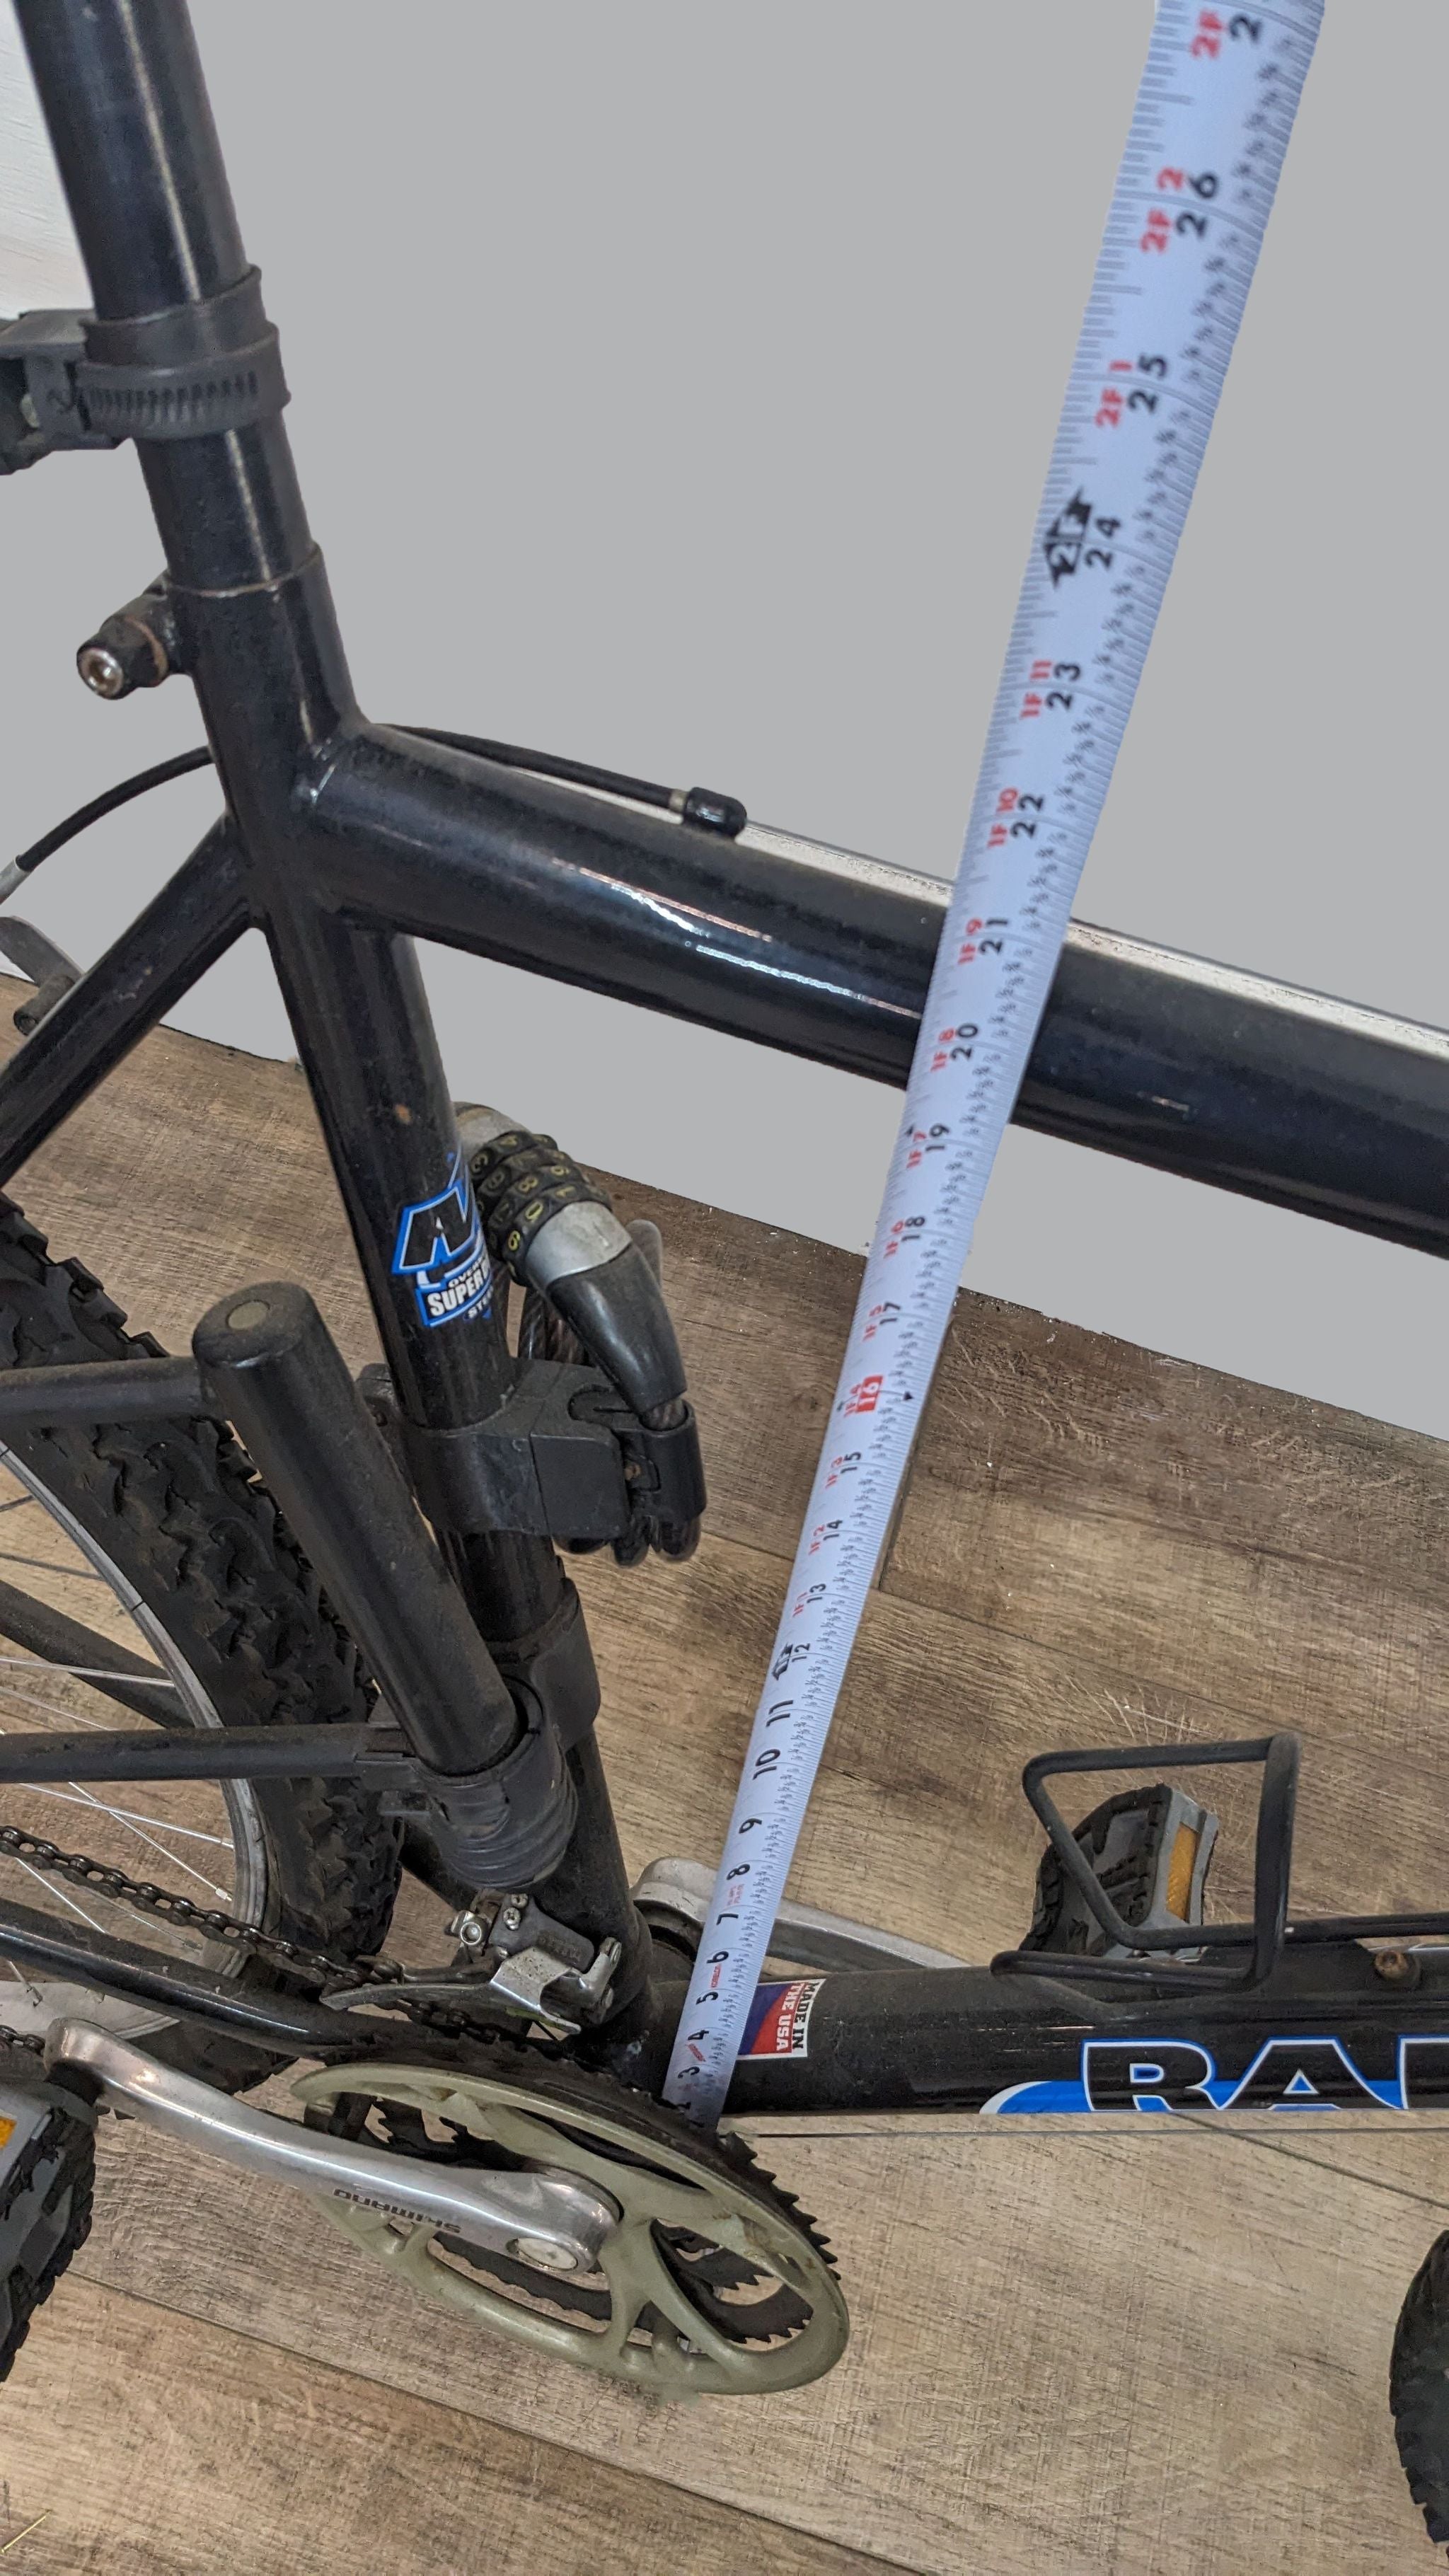 Black Raleigh mountain bike with a visible measuring tape against the frame, displayed on a wooden floor.